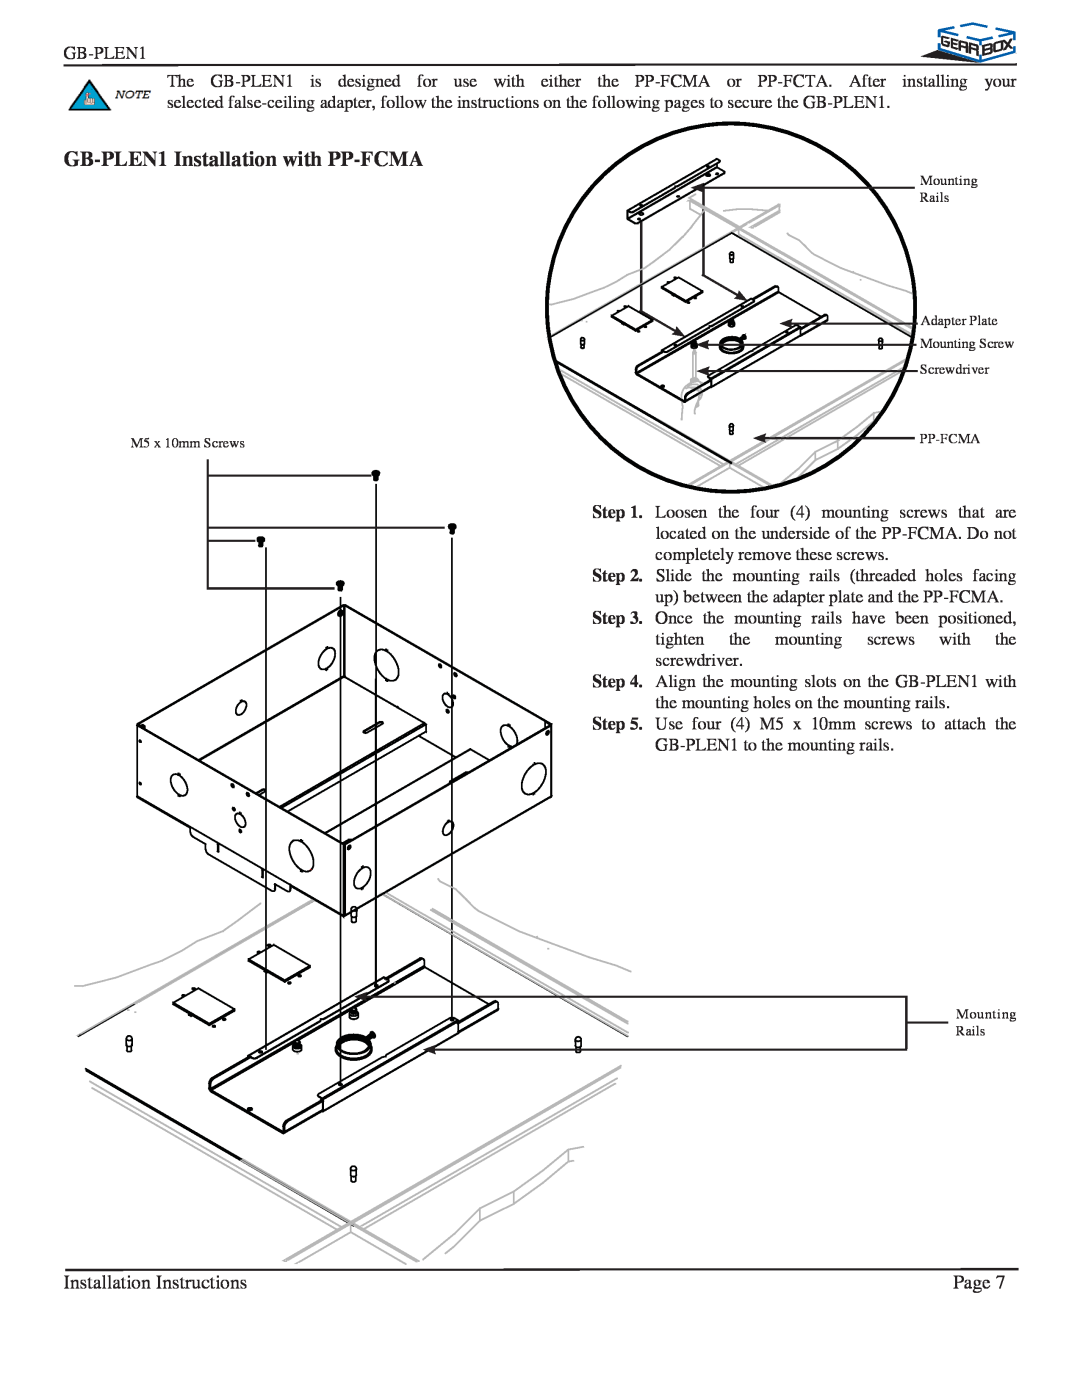 Premier Mounts installation instructions GB-PLEN1Installation with PP-FCMA, Installation Instructions, Page 